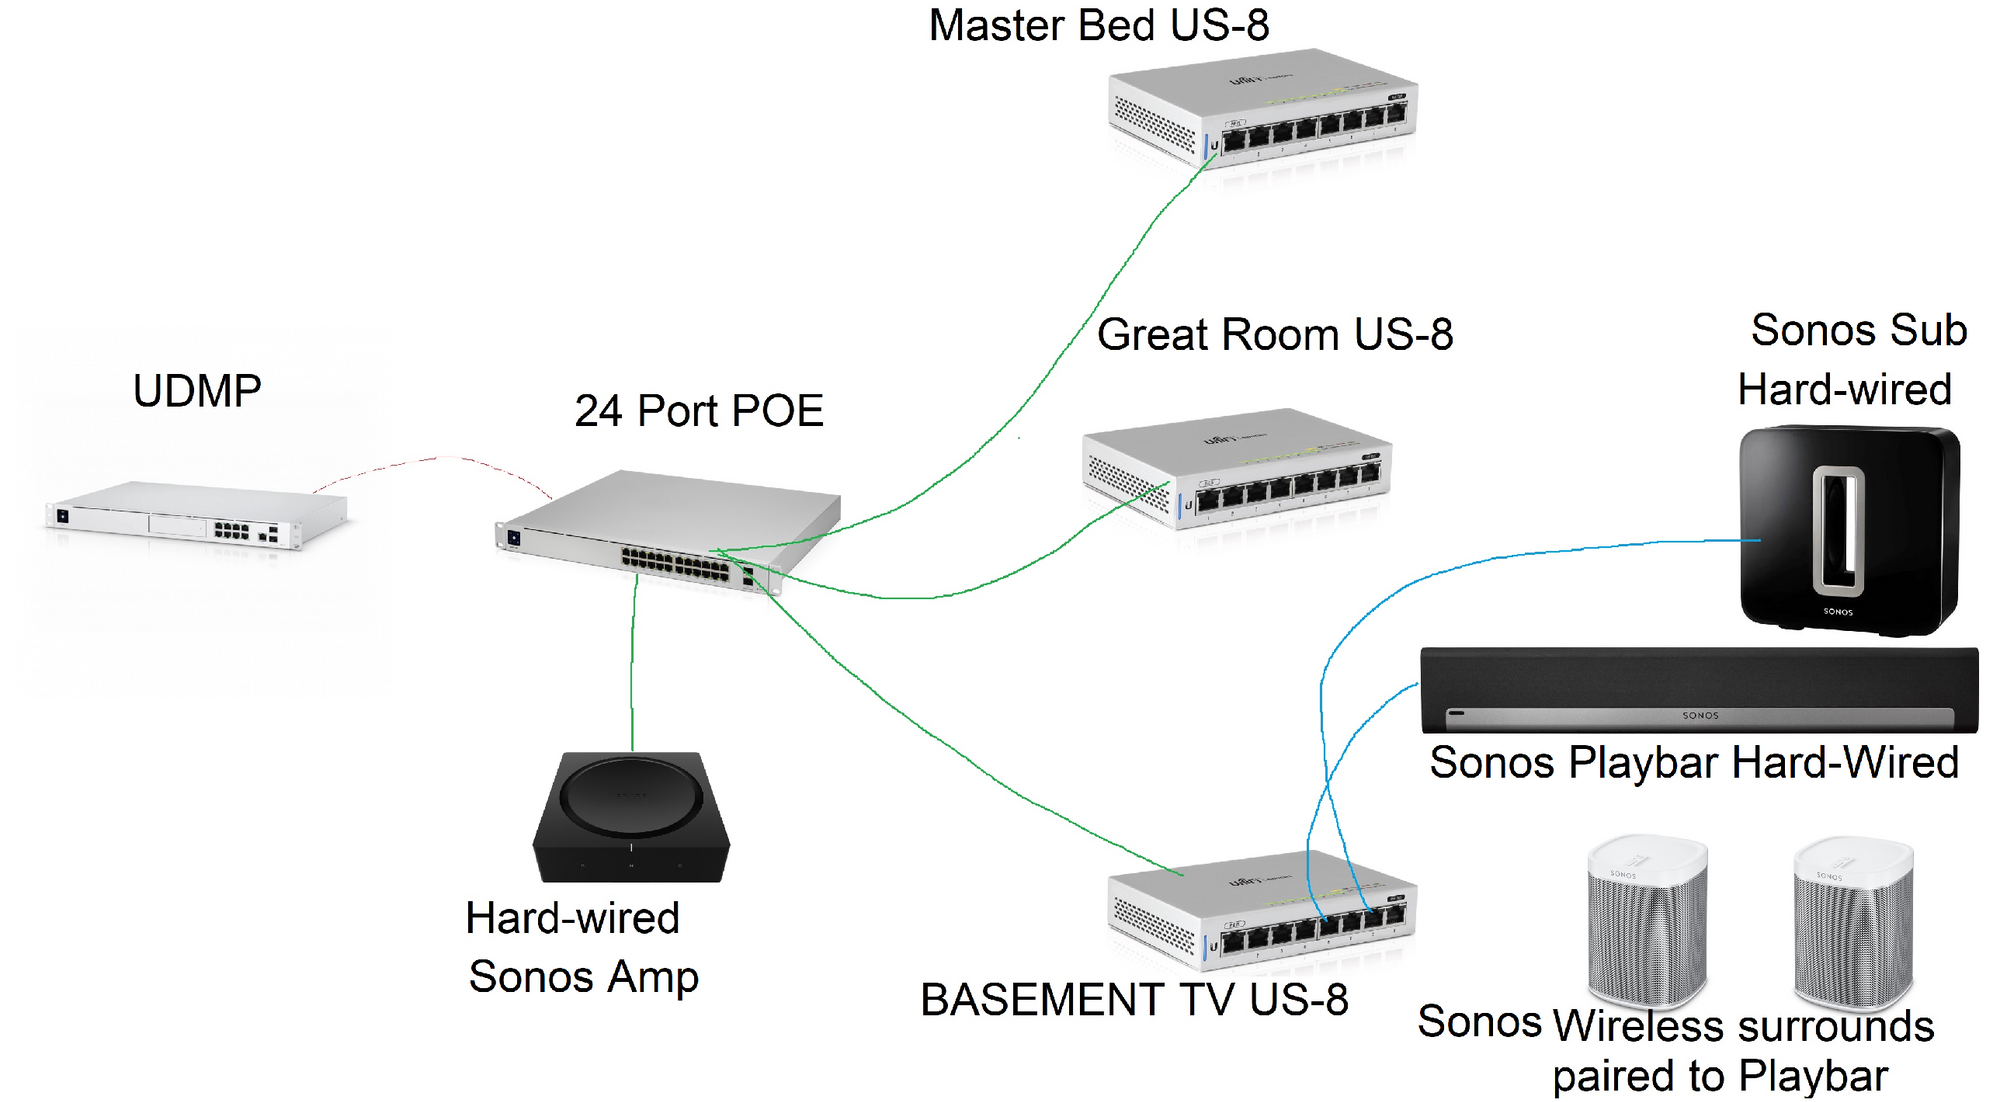 indtil nu accelerator Livlig Sonos STP settings - What are your go to settings that actually yield  success in network stability, when you have mixed use of wired & wireless  Sonos gear? | Ubiquiti Community